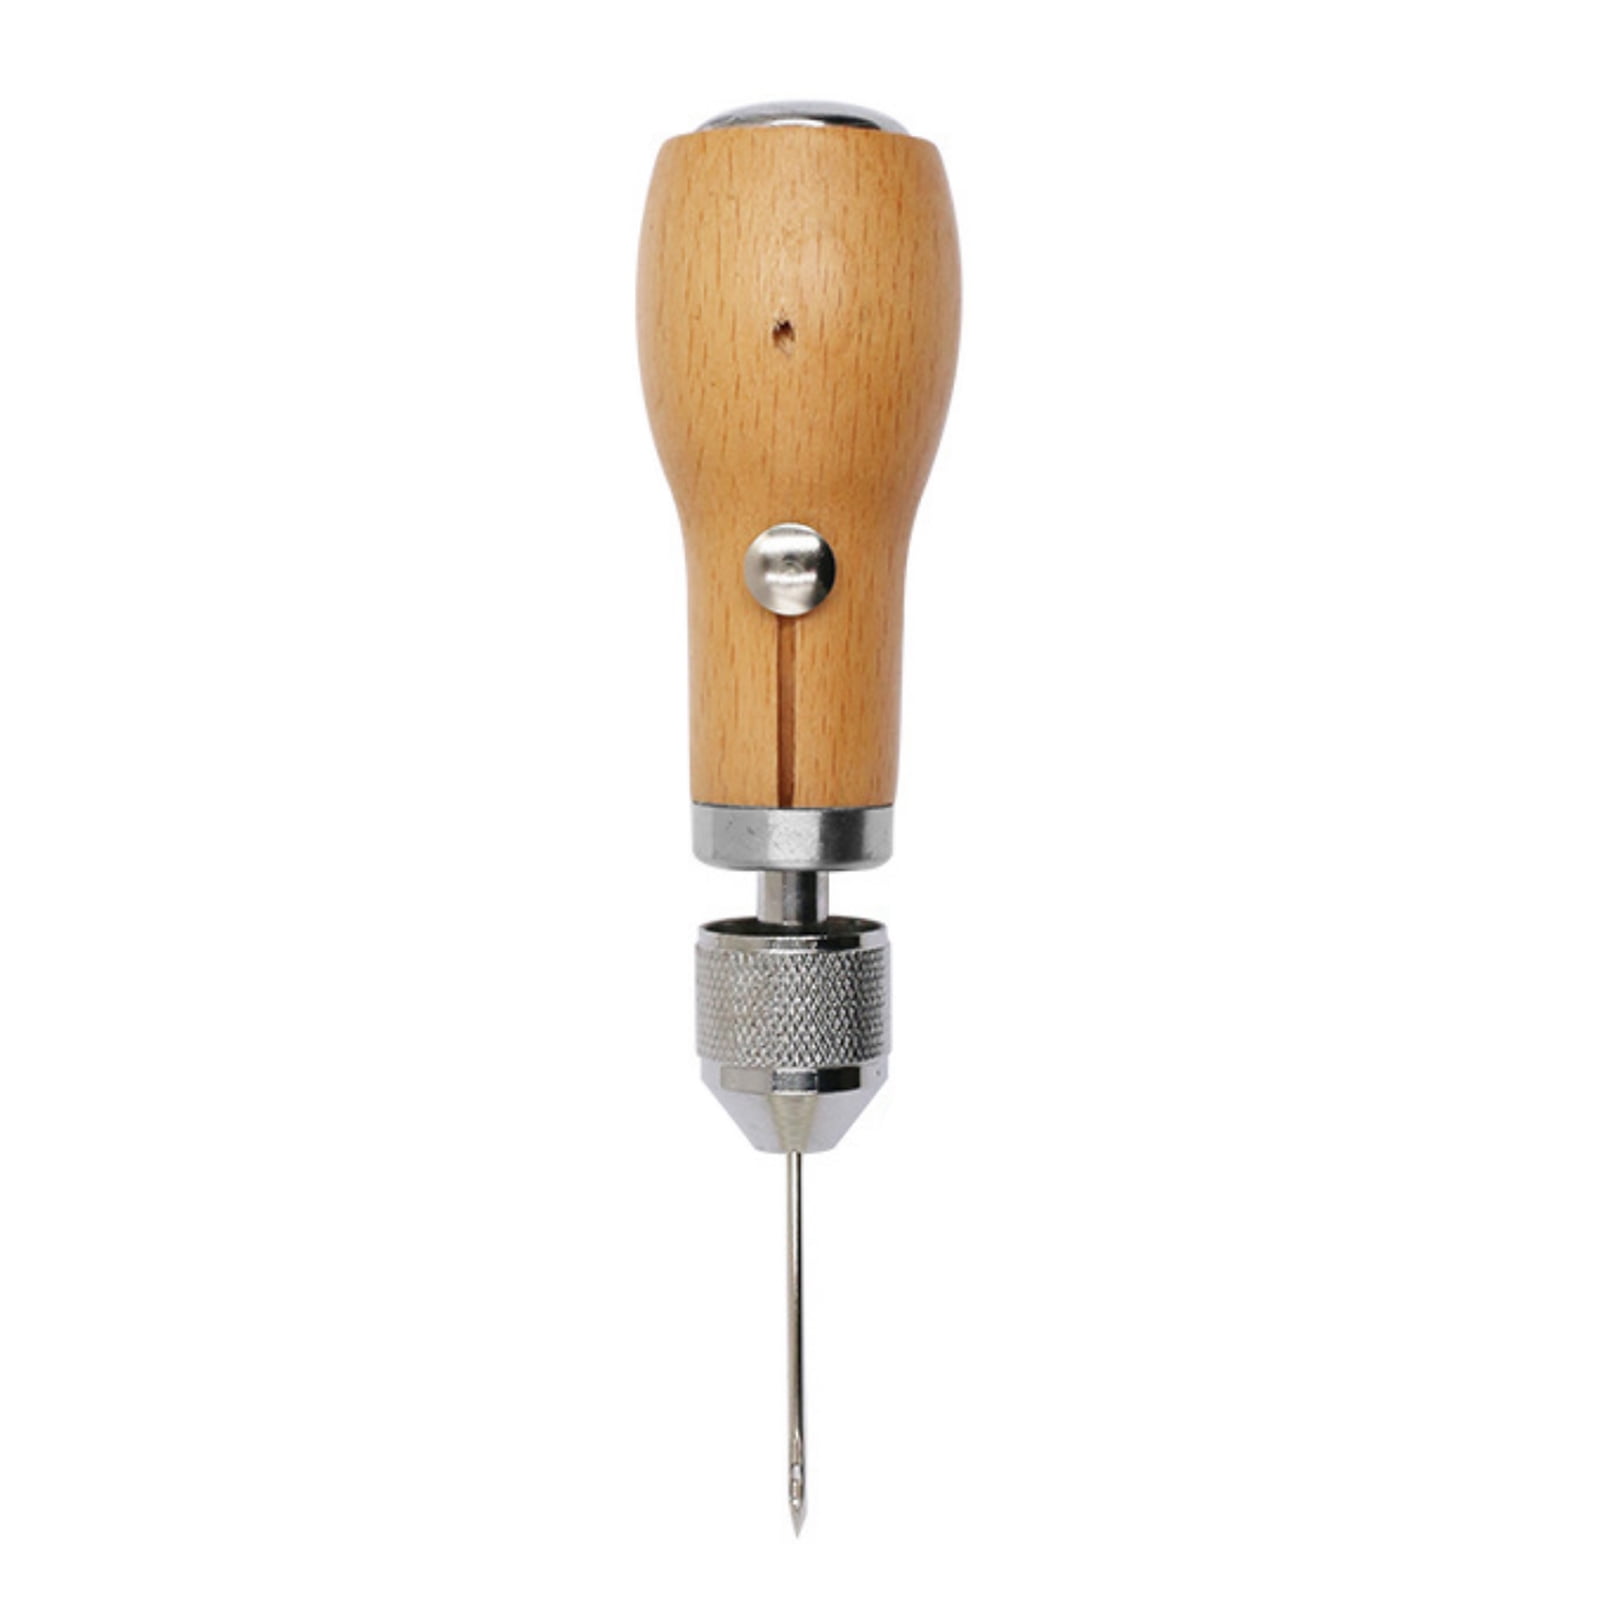 Meterk Leather Stitching Tool Hand Stitcher Sewing Awl Upholstery Stitching  Sewing Tool With 1 Pcs Wax Thread 2 Pcs Neddles For Leather Fabric 